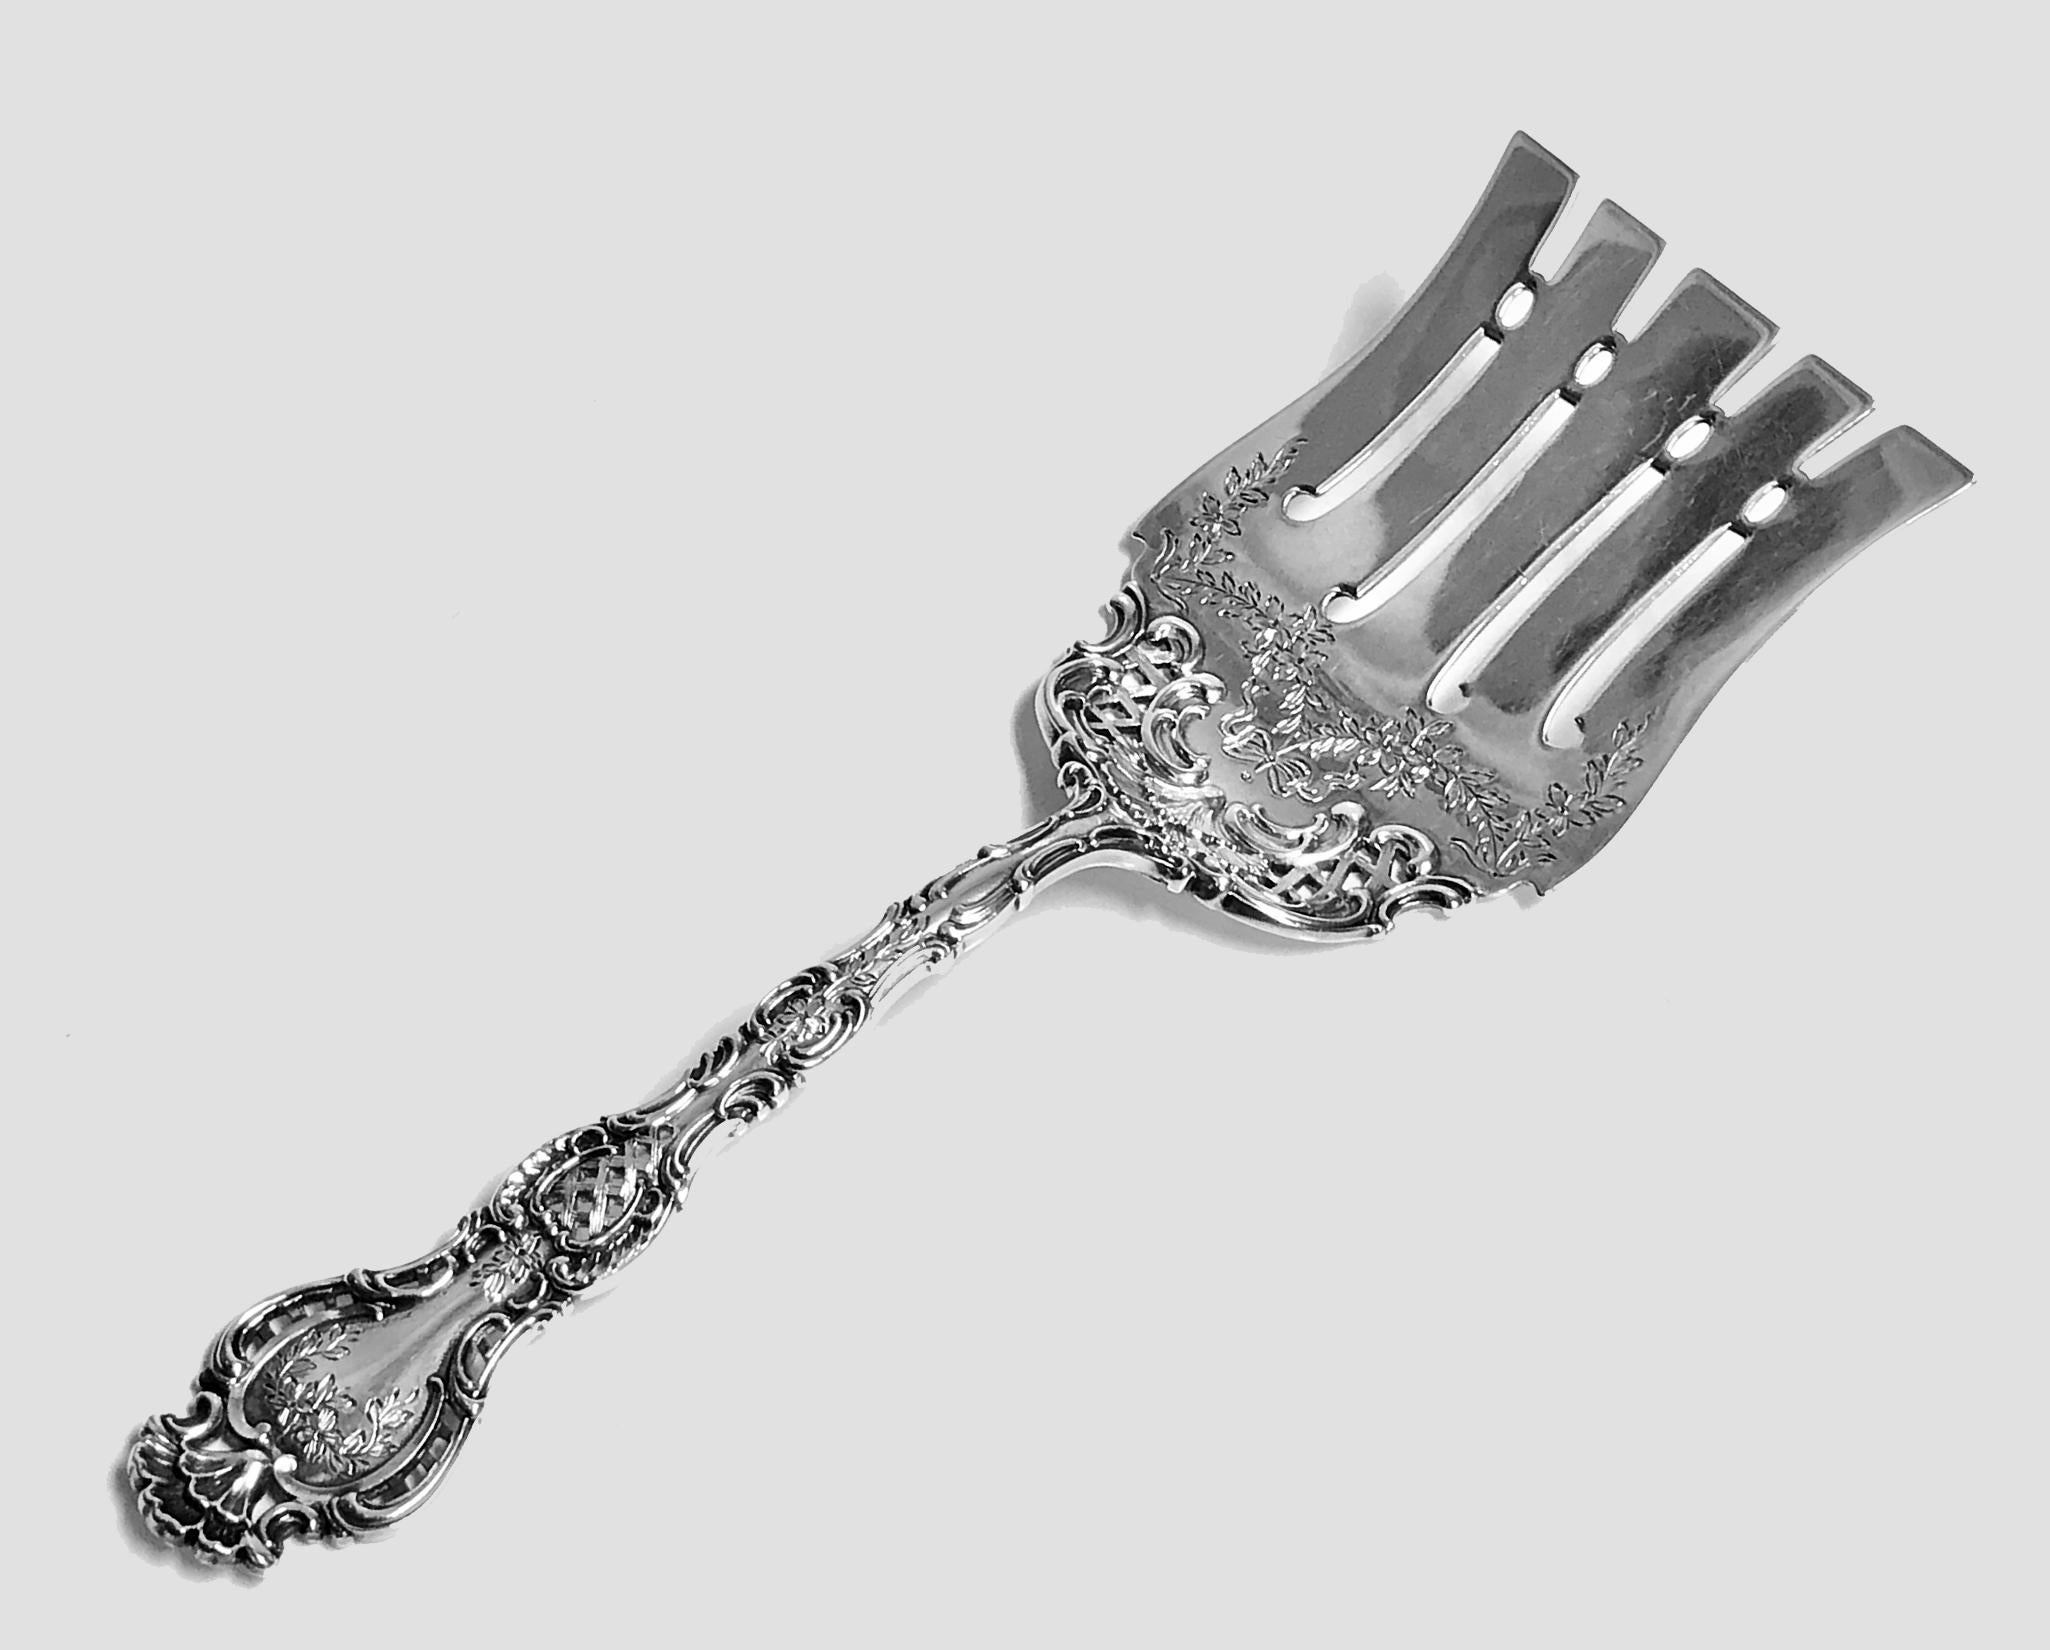 Durgin Gorham Fancy Regent sterling silver Asparagus Fork, circa 1910. Scrolled and pierced handle with engraved flowers and scallop shell terminal. Flat lifter with concave sides, the tines with pierced scroll ovals between. A rare early piece in